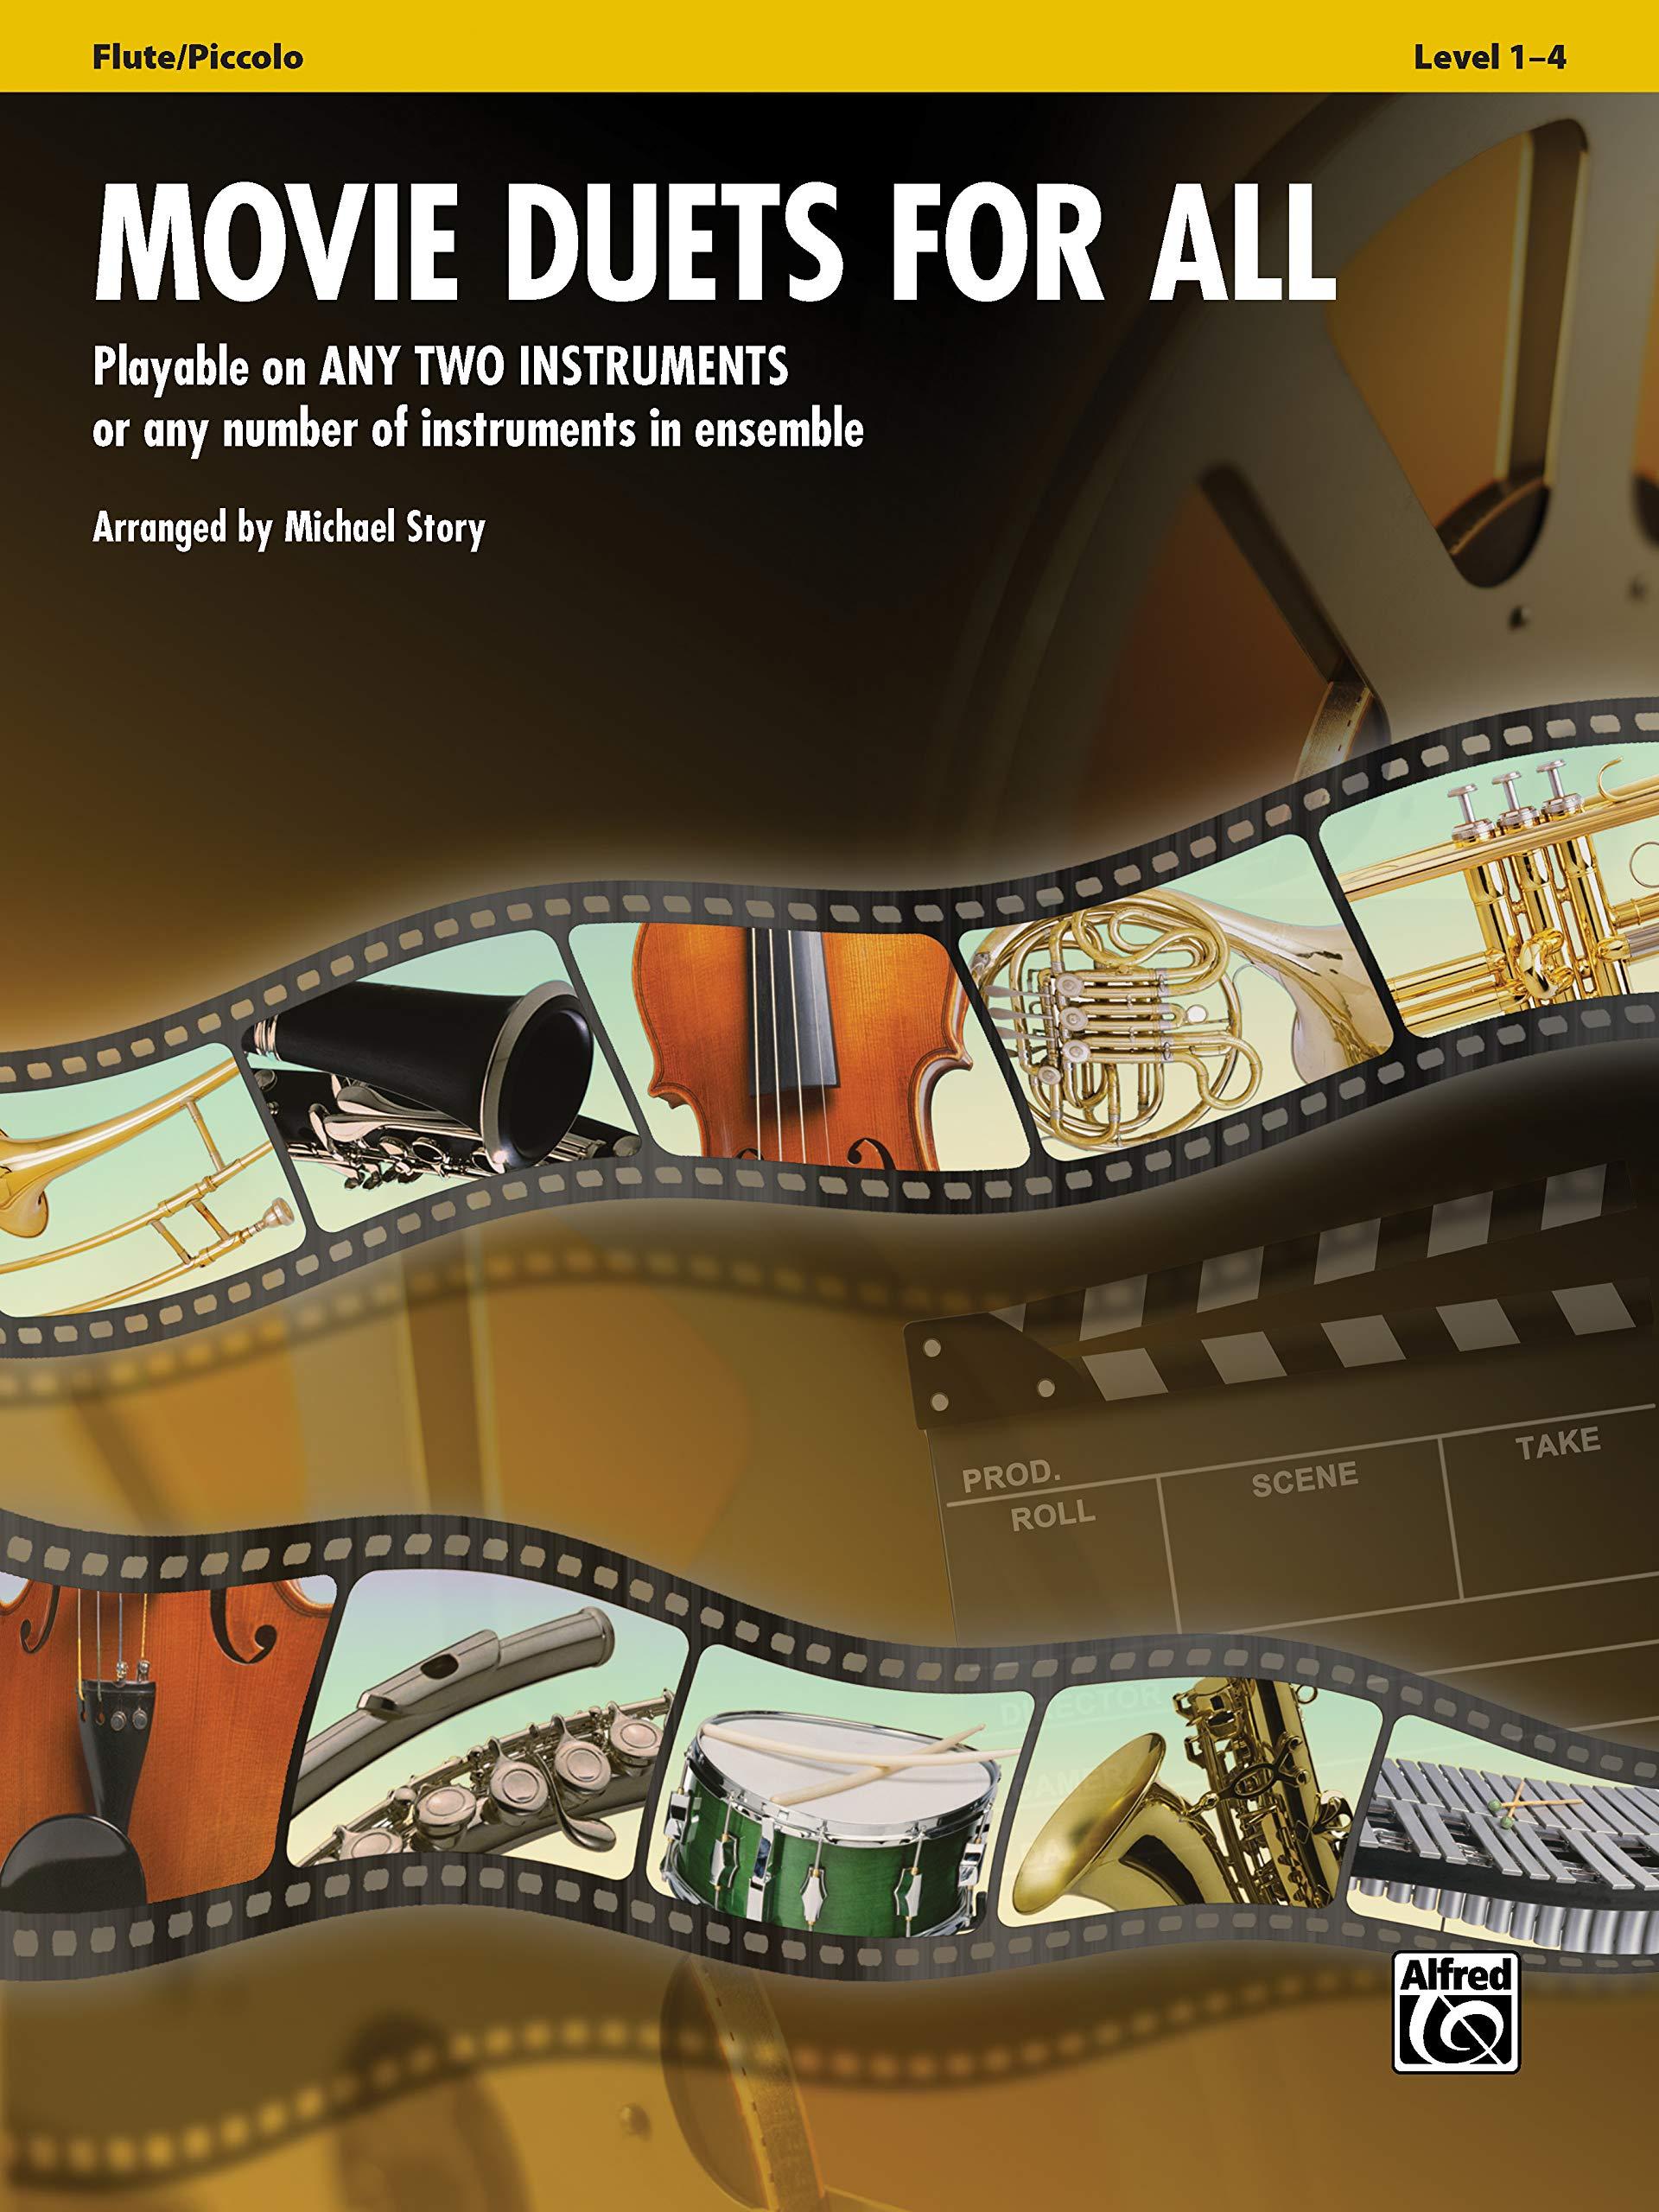 Movie Duets for All, Playable on any two instruments or any number of instruments in ensemble | Suono Flauti